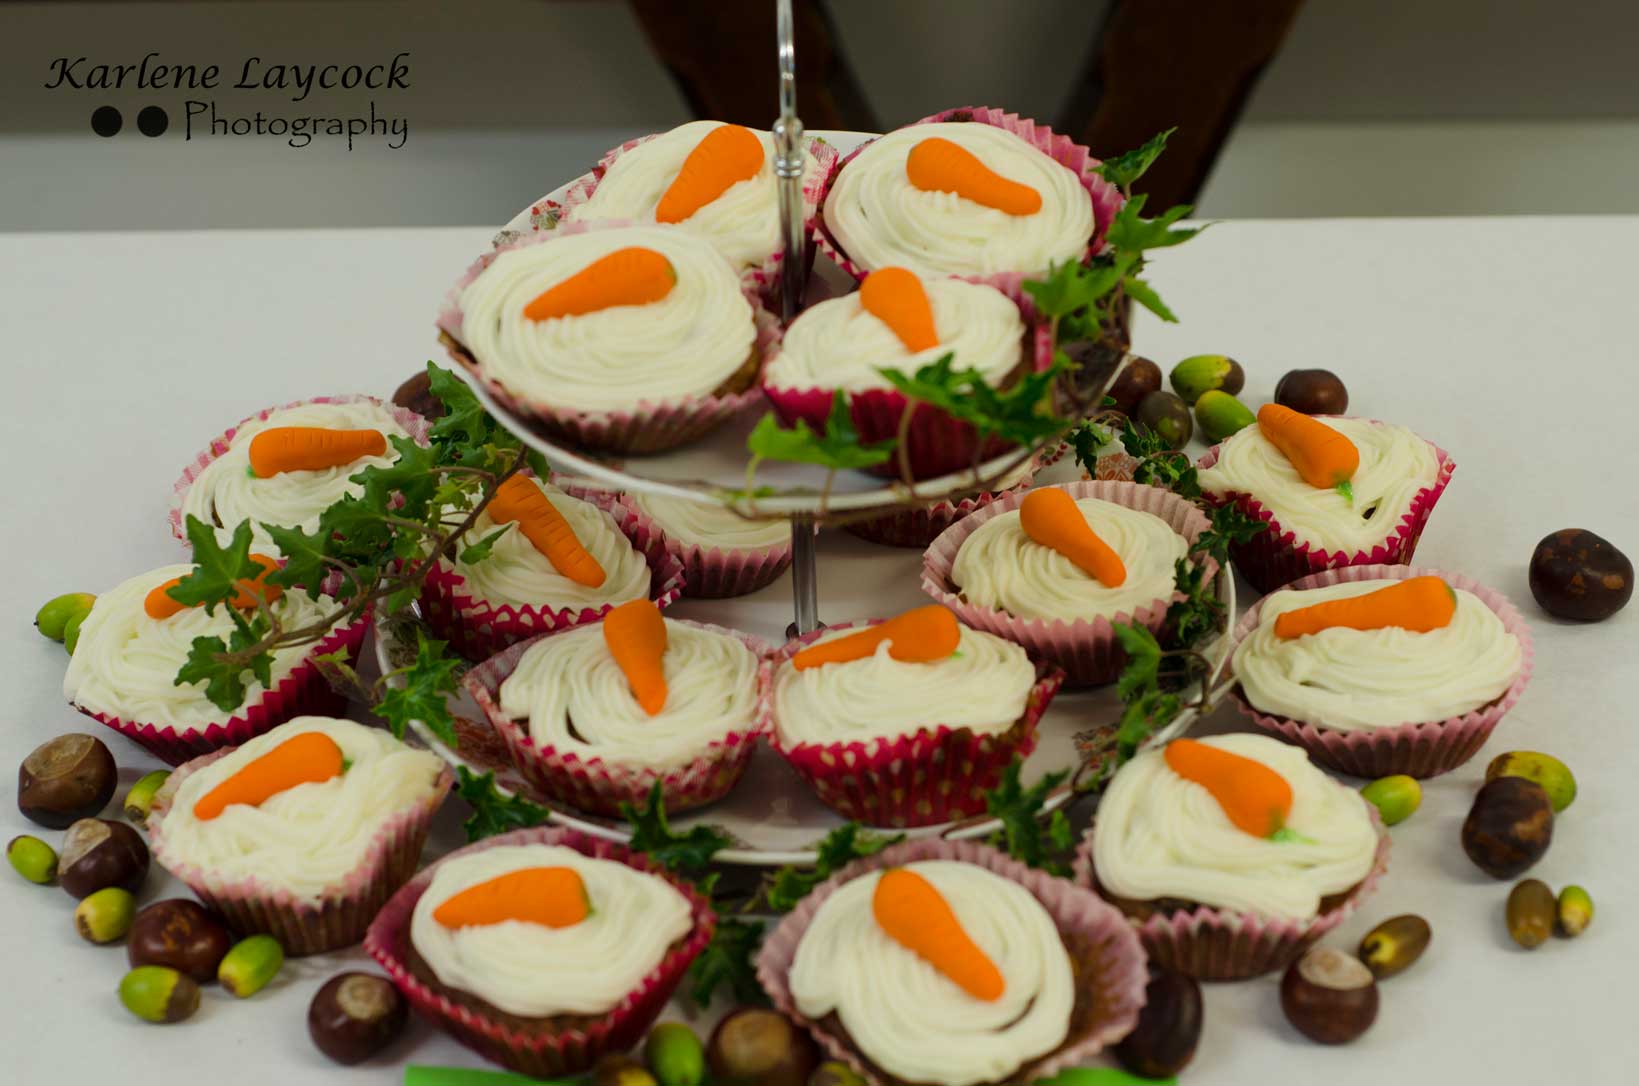 Photograph of Carrot Cupcakes taken at a Local Bake Off Event